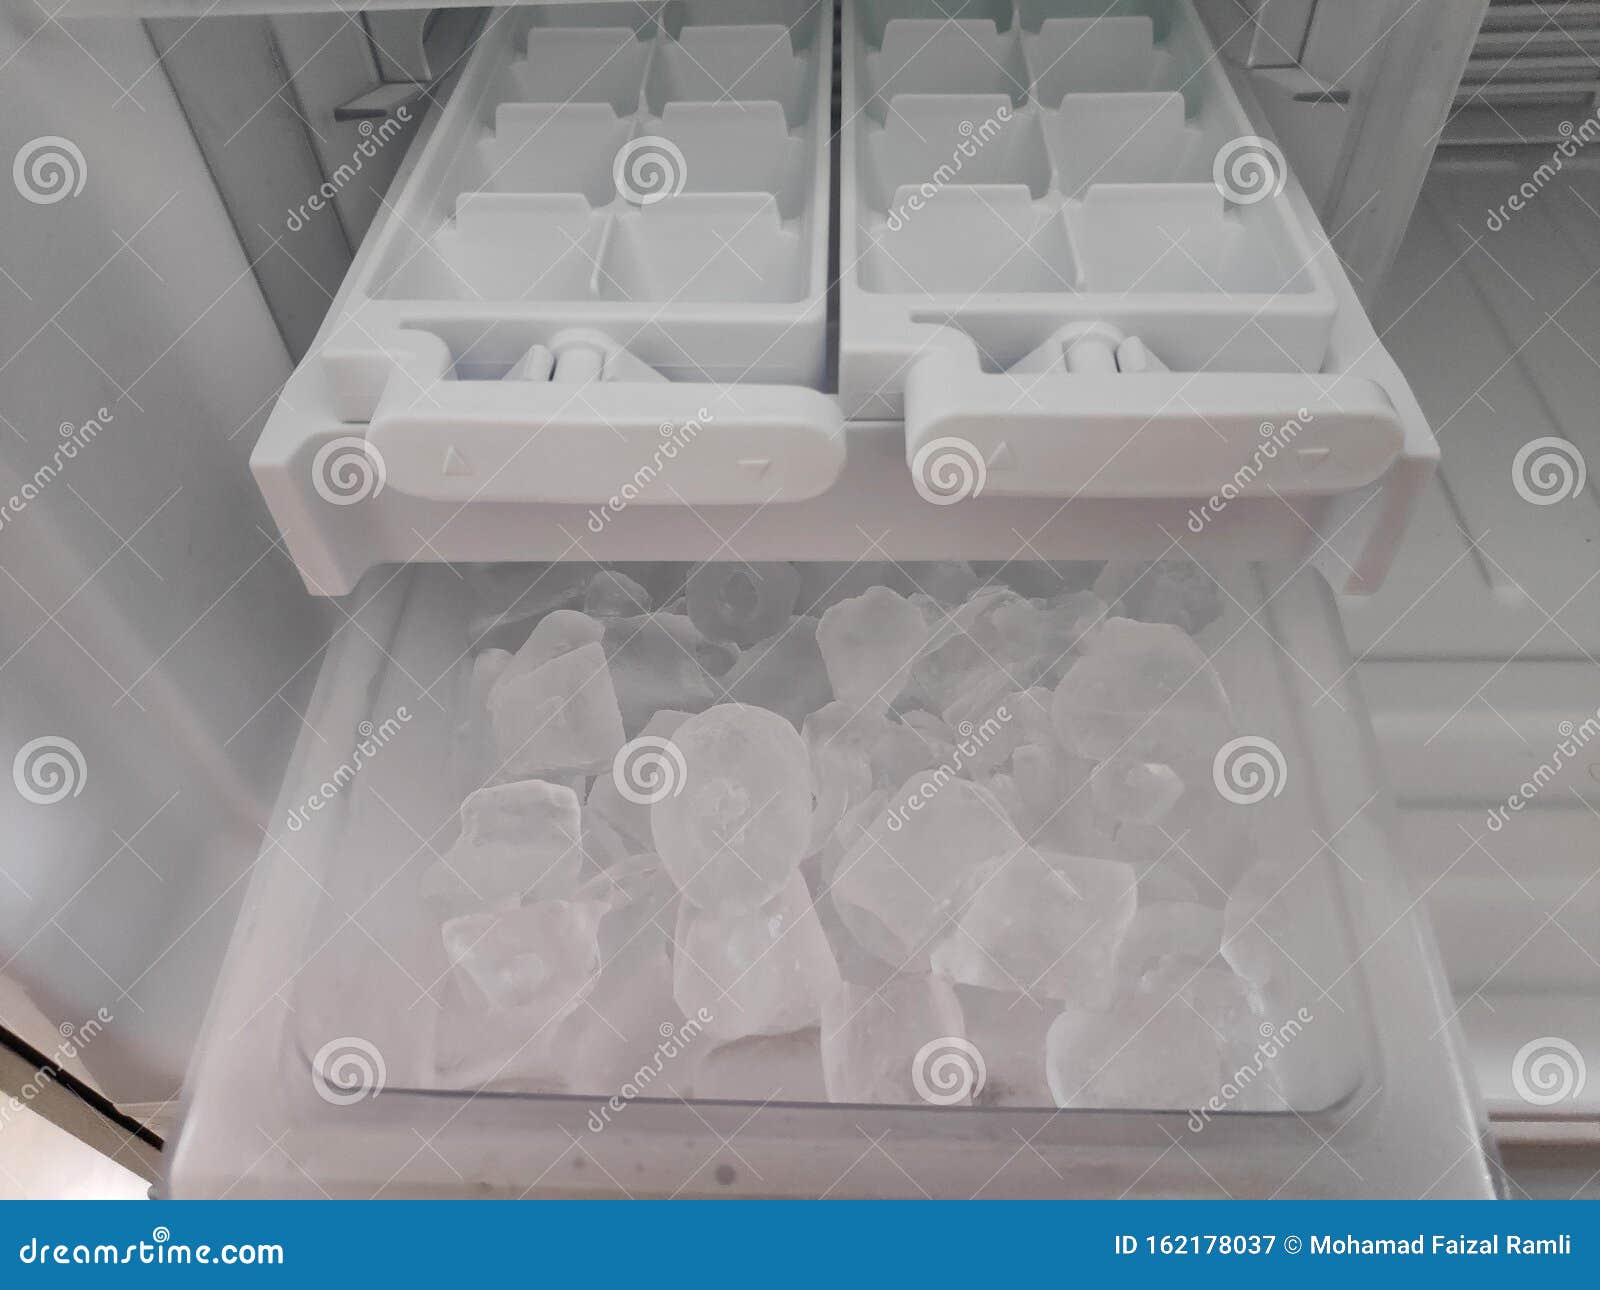 ice maker container in the refrigerator